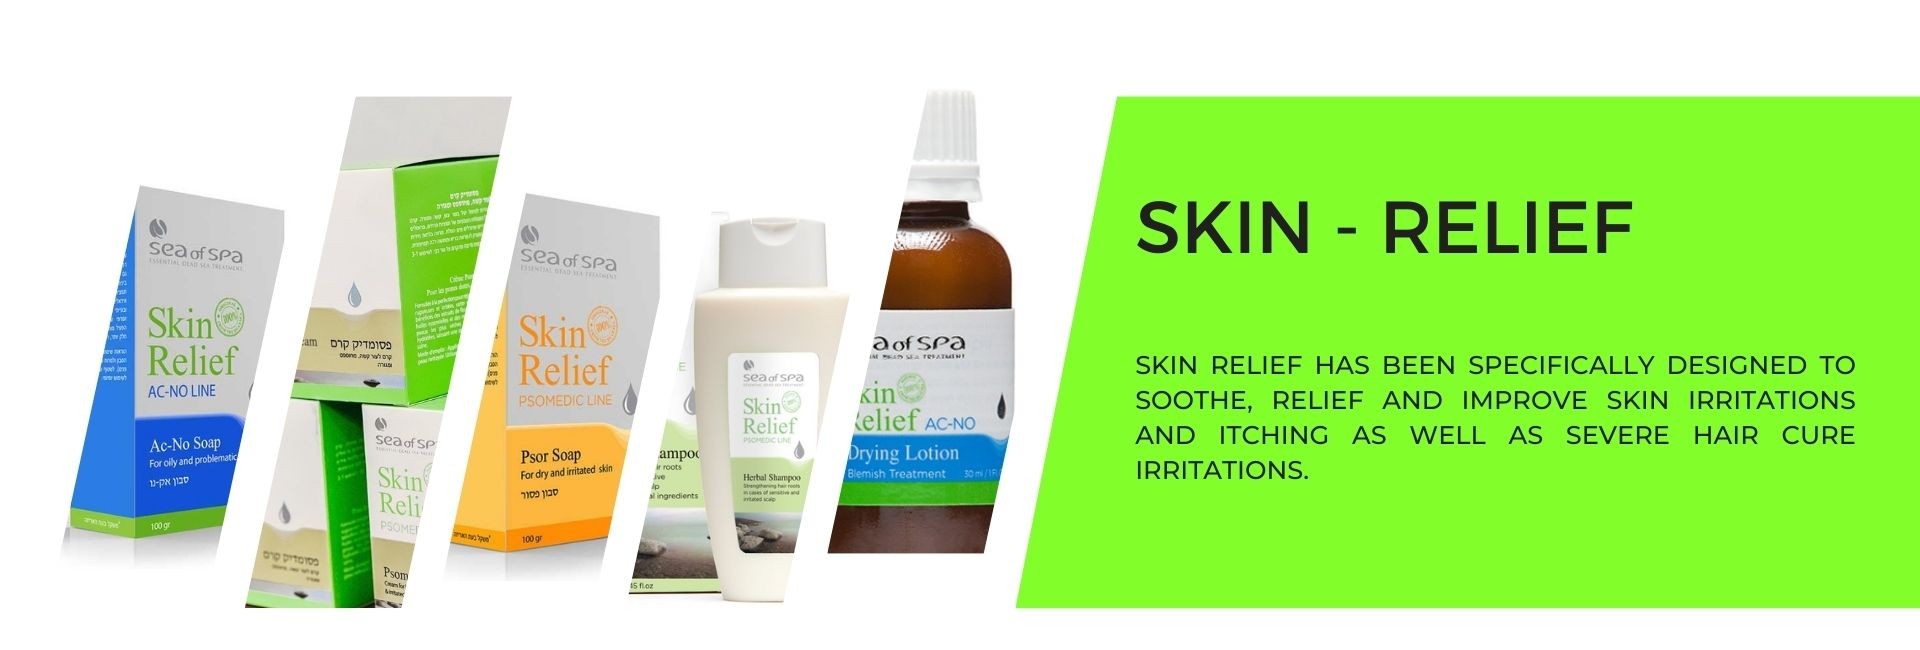 SKIN RELIEF HAS BEEN SPECIFICALLY DESIGNED TO SOOTHE, RELIEF AND IMPROVE SKIN IRRITATIONS AND ITCHING AS WELL AS SEVERE HAIR CURE IRRITATIONS.